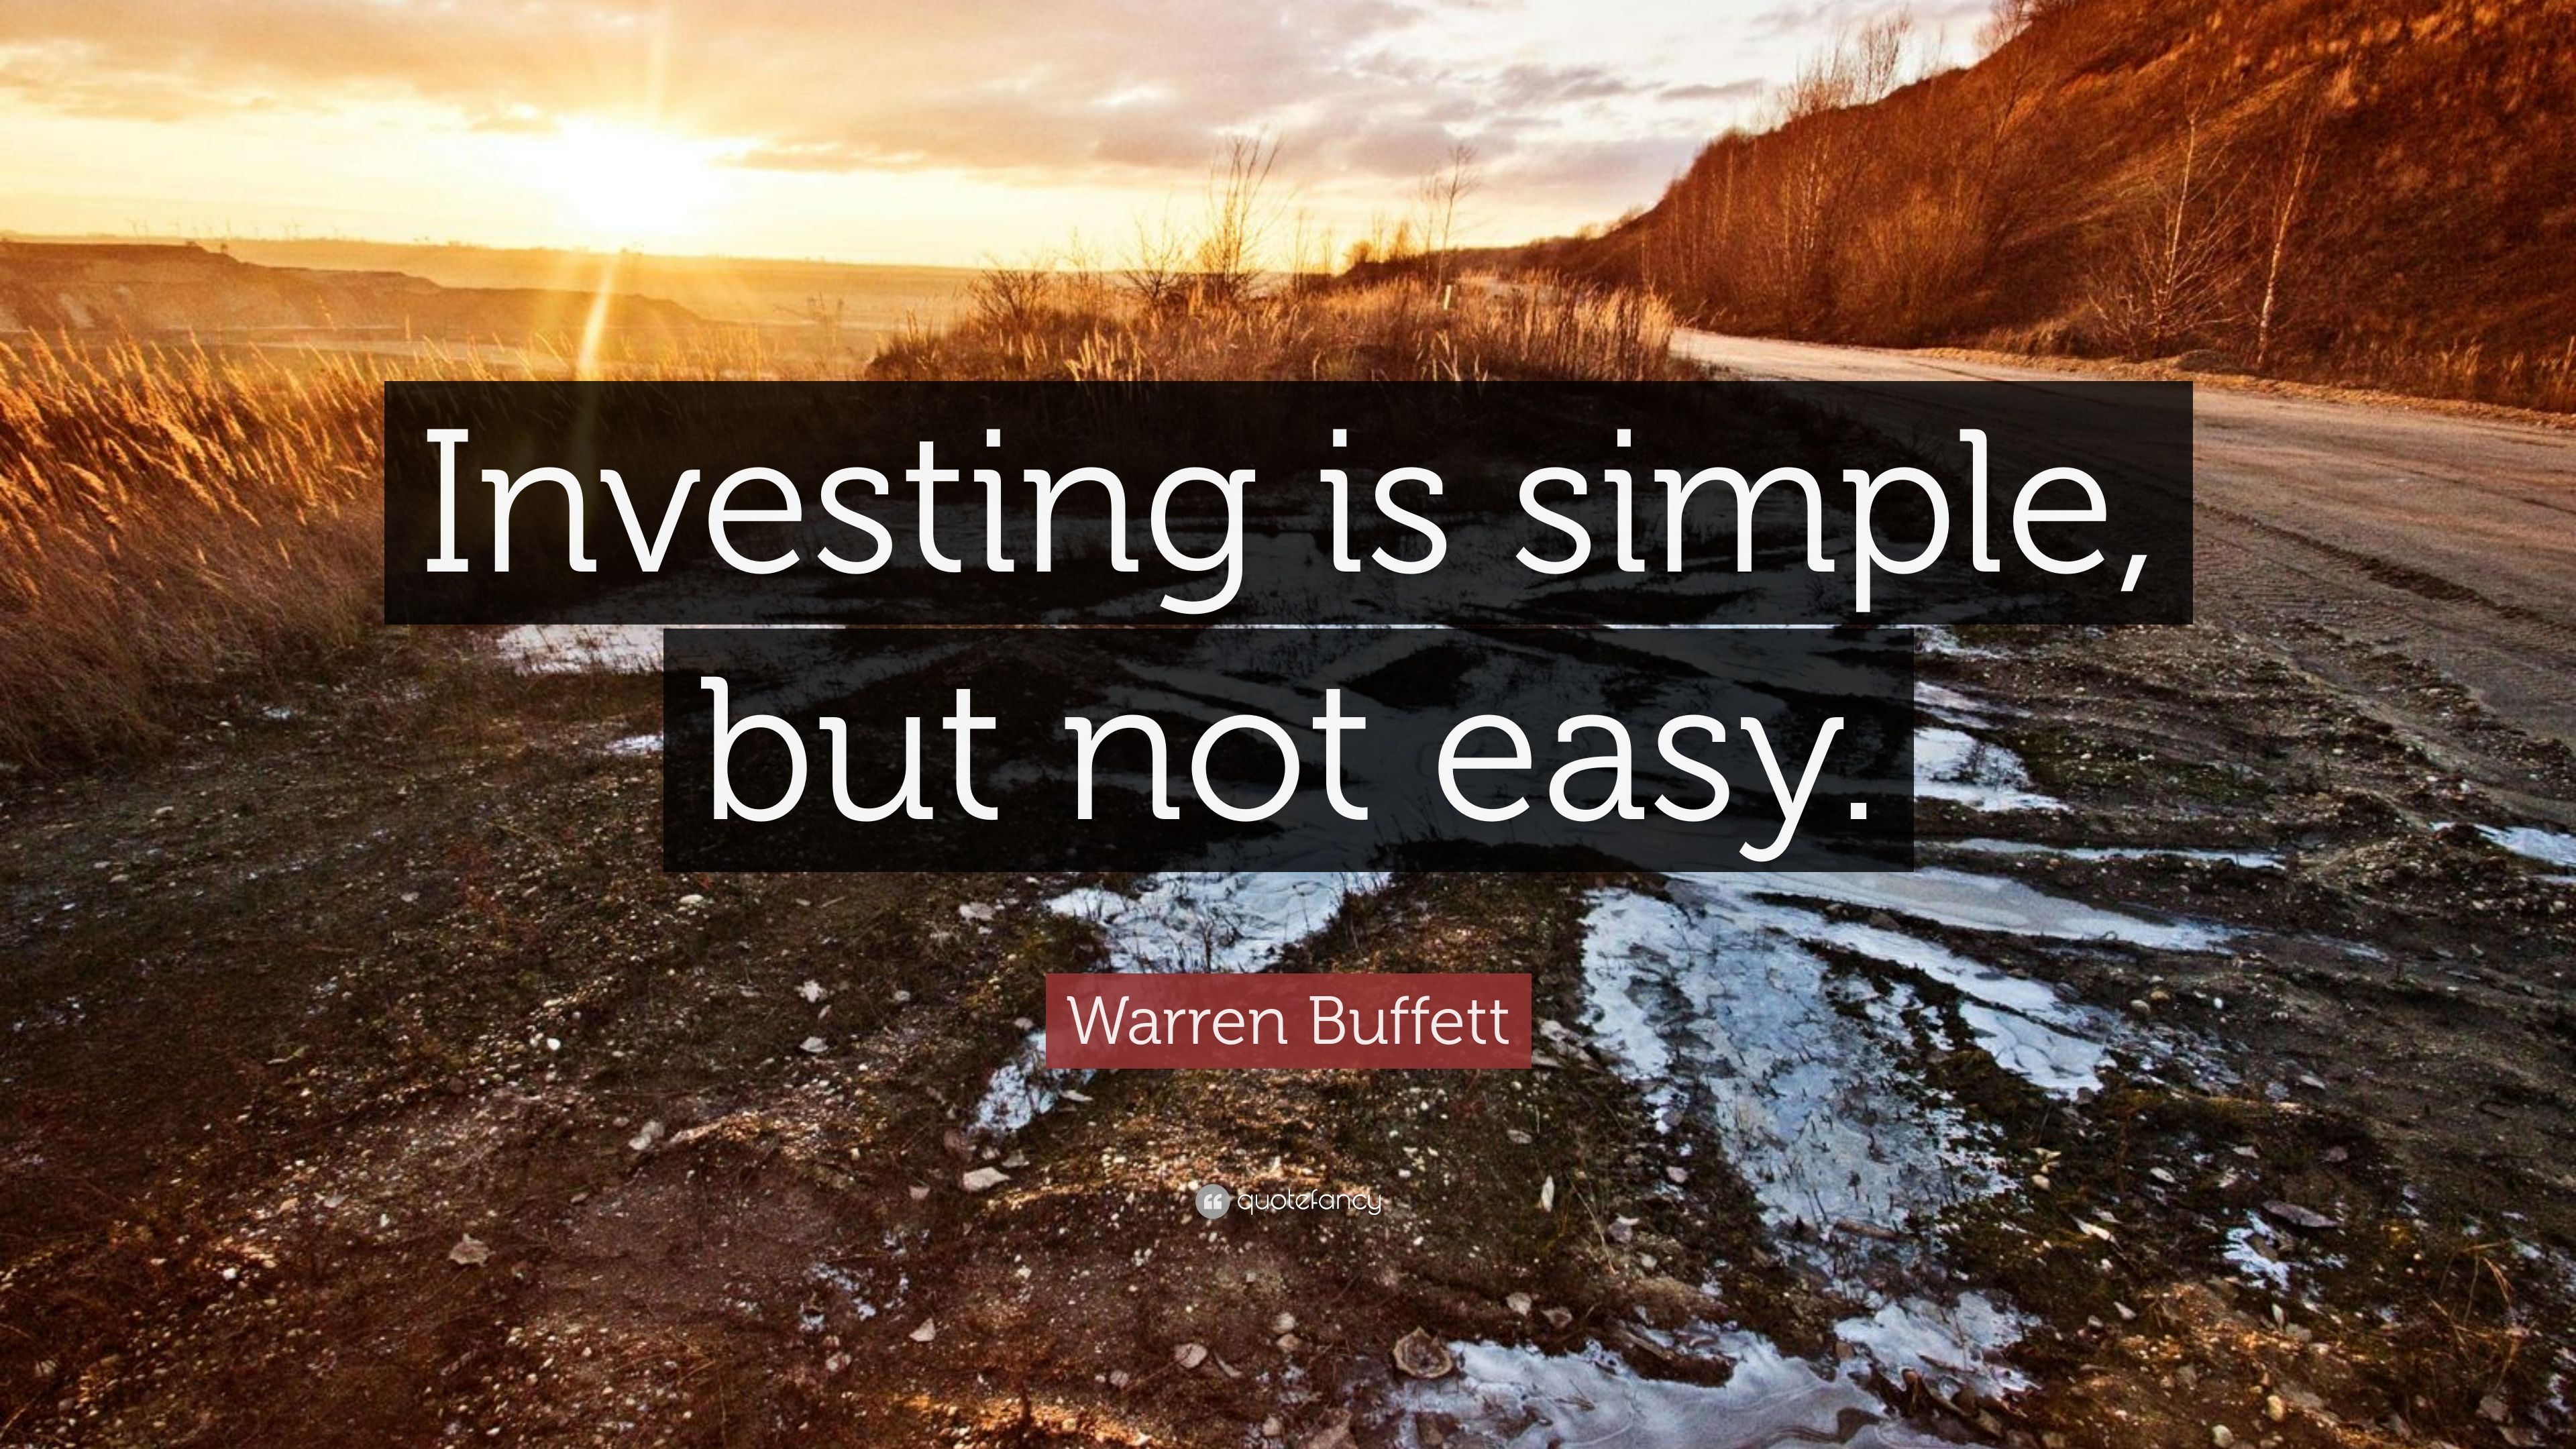 Quotes About Investing (2022 Update)